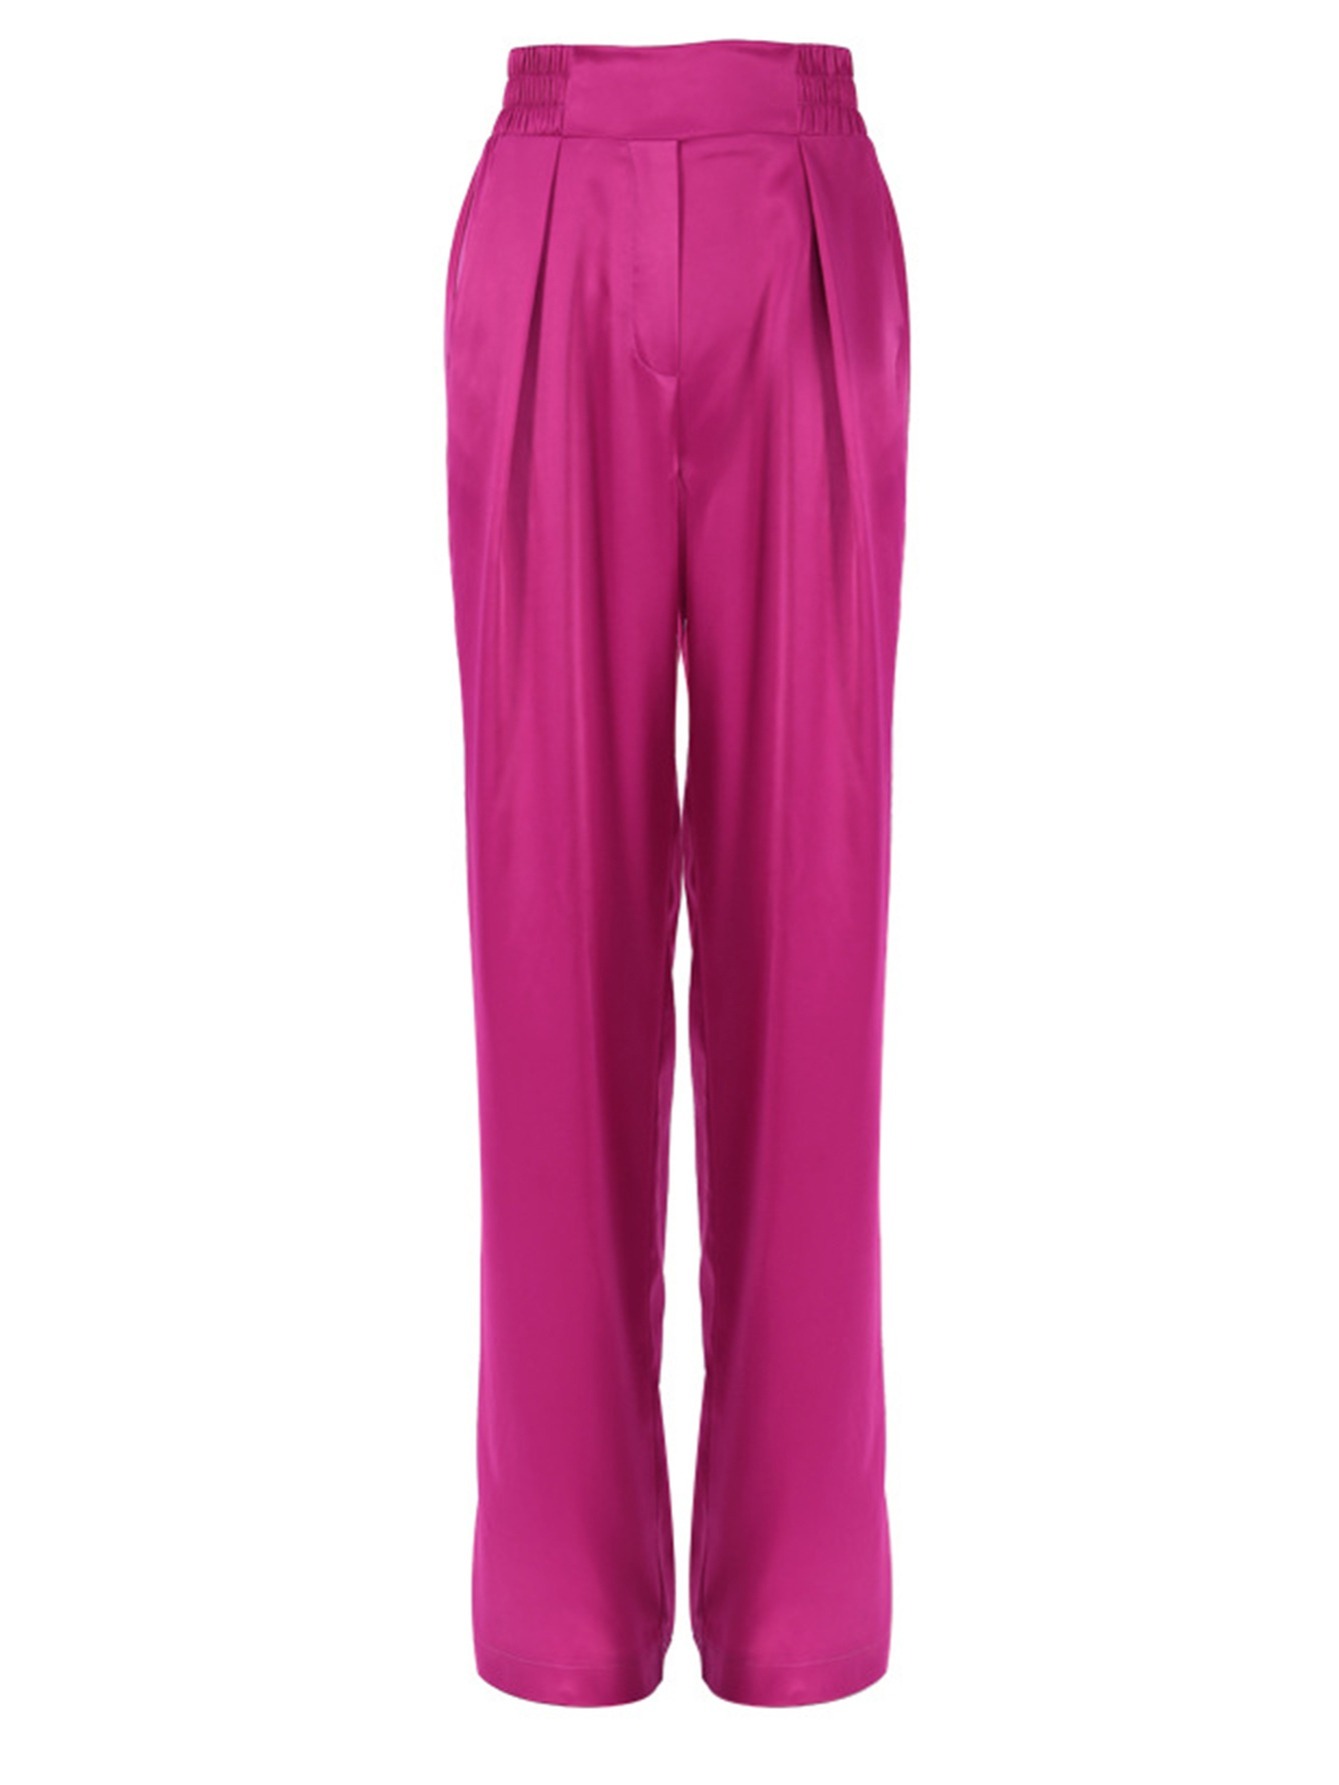 safuny Women's Wide Leg Suit Pants Casual Comfy Trendy Solid Color Teen  Relaxed Girls High Rise Trousers Hot Pink XL